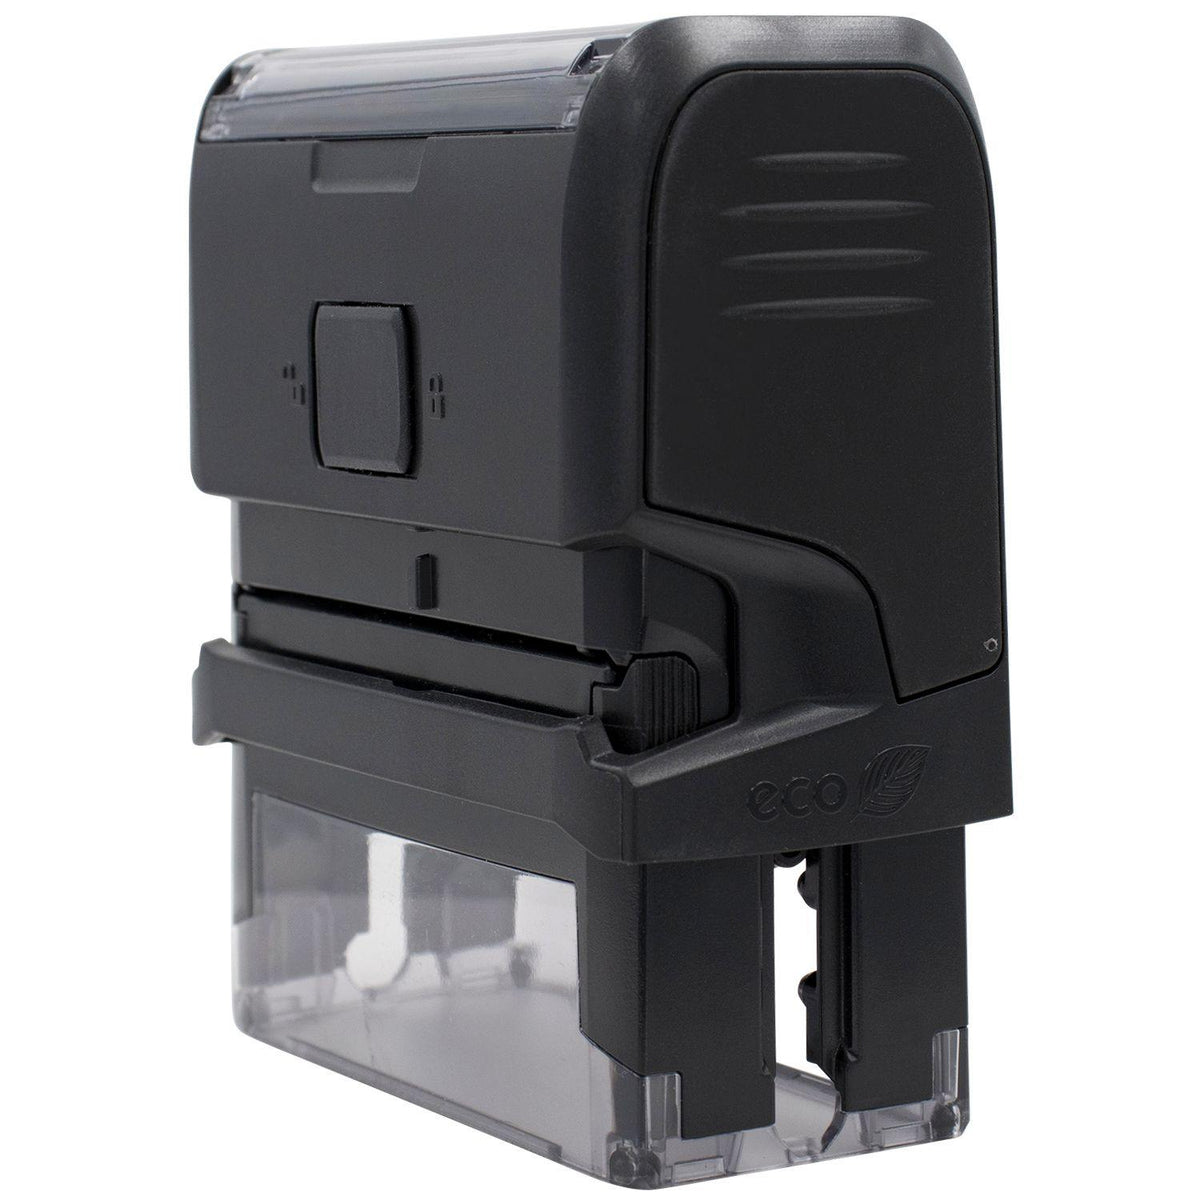 Large Self-Inking Narrow Font File Copy Stamp - Engineer Seal Stamps - Brand_Trodat, Impression Size_Large, Stamp Type_Self-Inking Stamp, Type of Use_Office, Type of Use_Professional